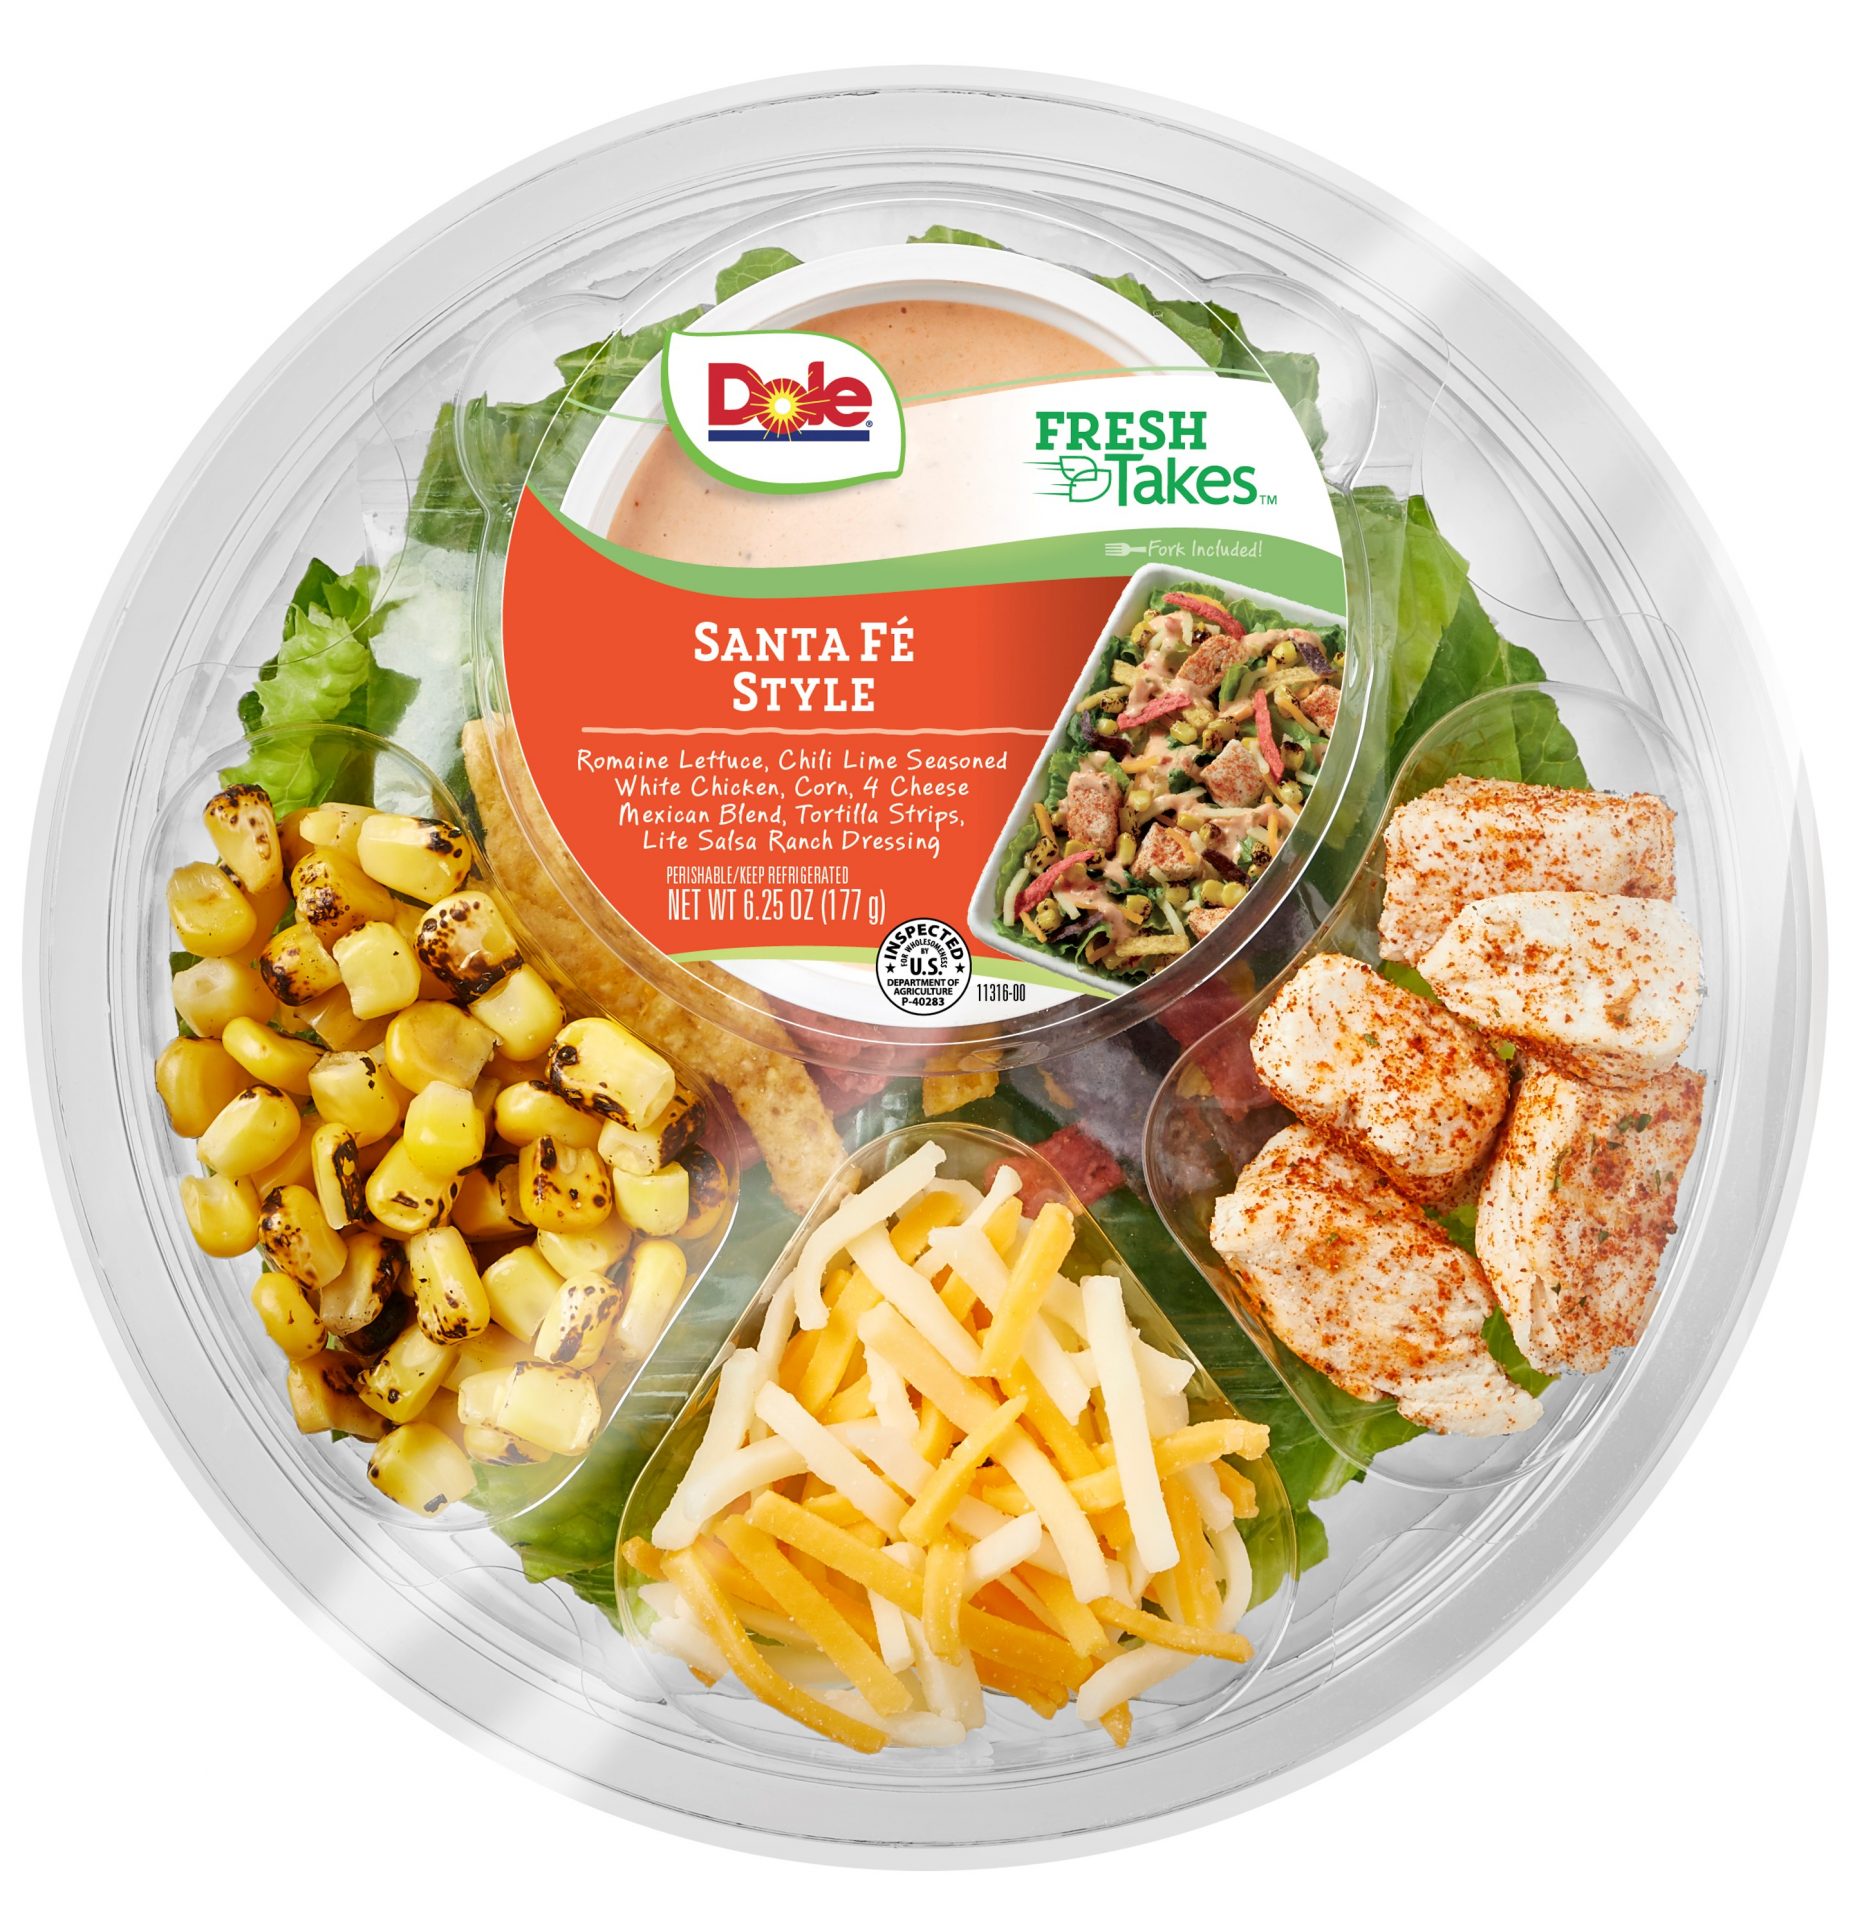 Dole rolls out line of 6 Fresh Takes salad nationally